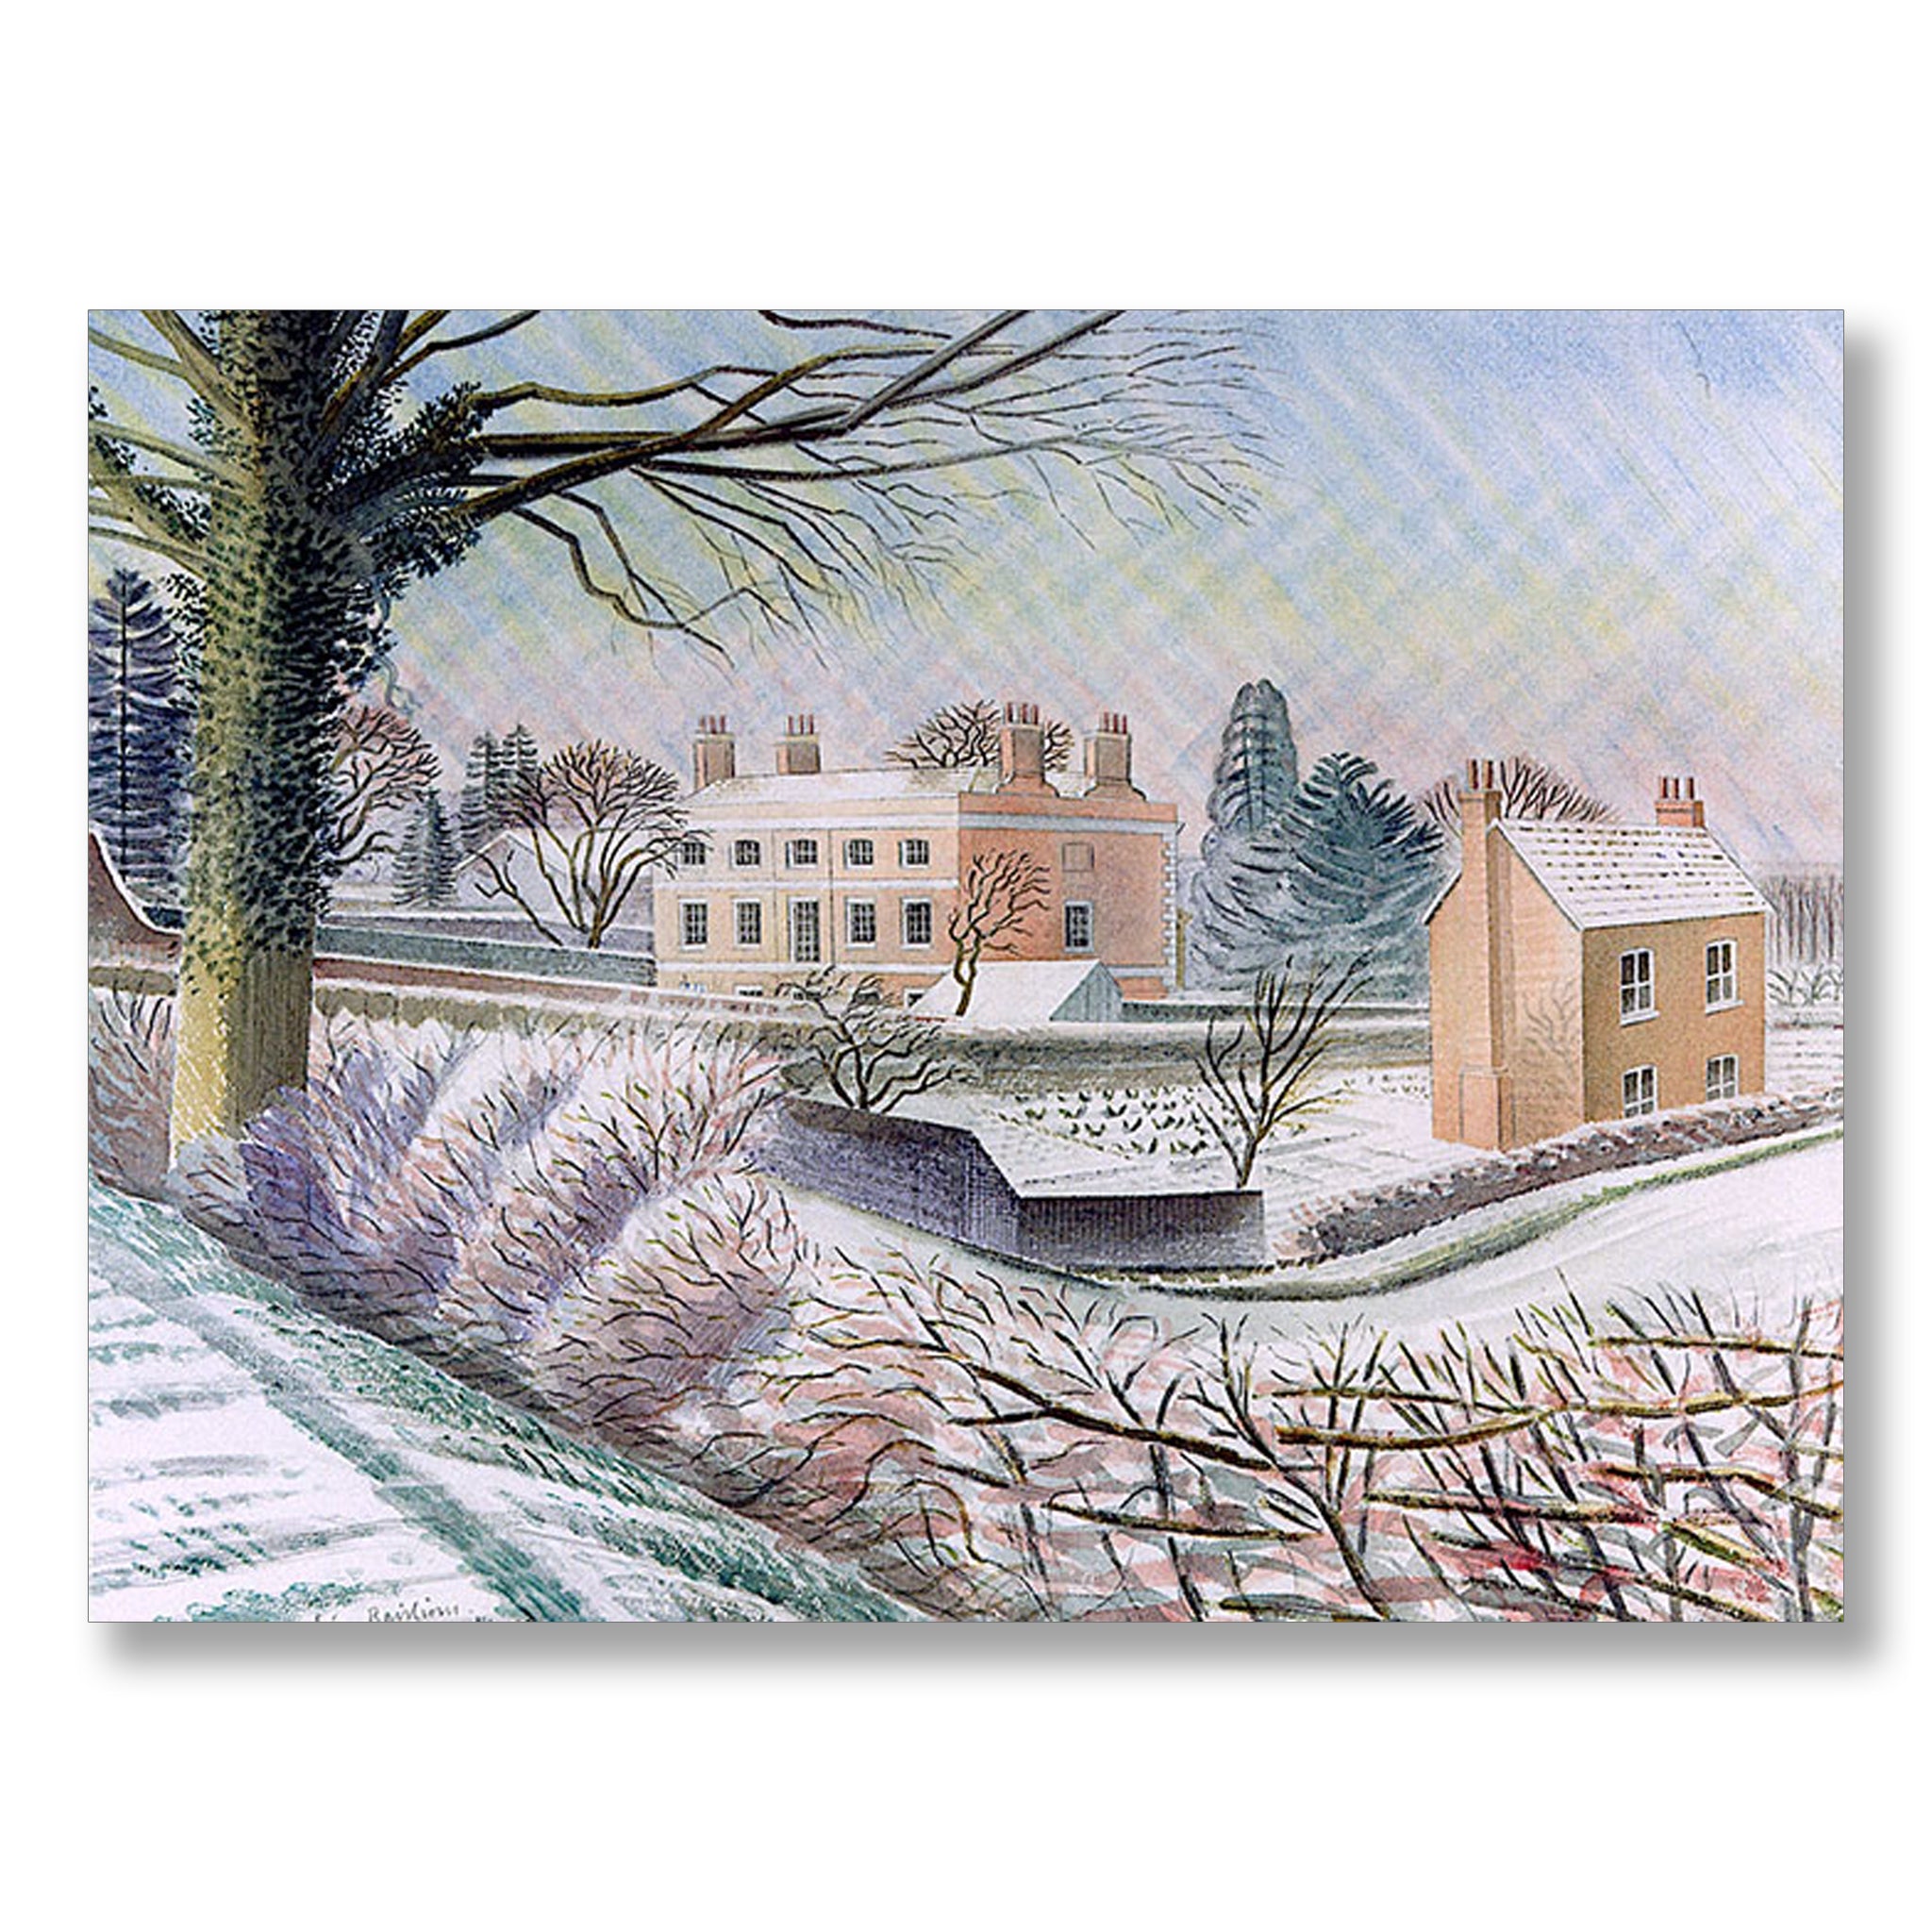 Vicarage in the Snow 1935 by Eric Ravilious